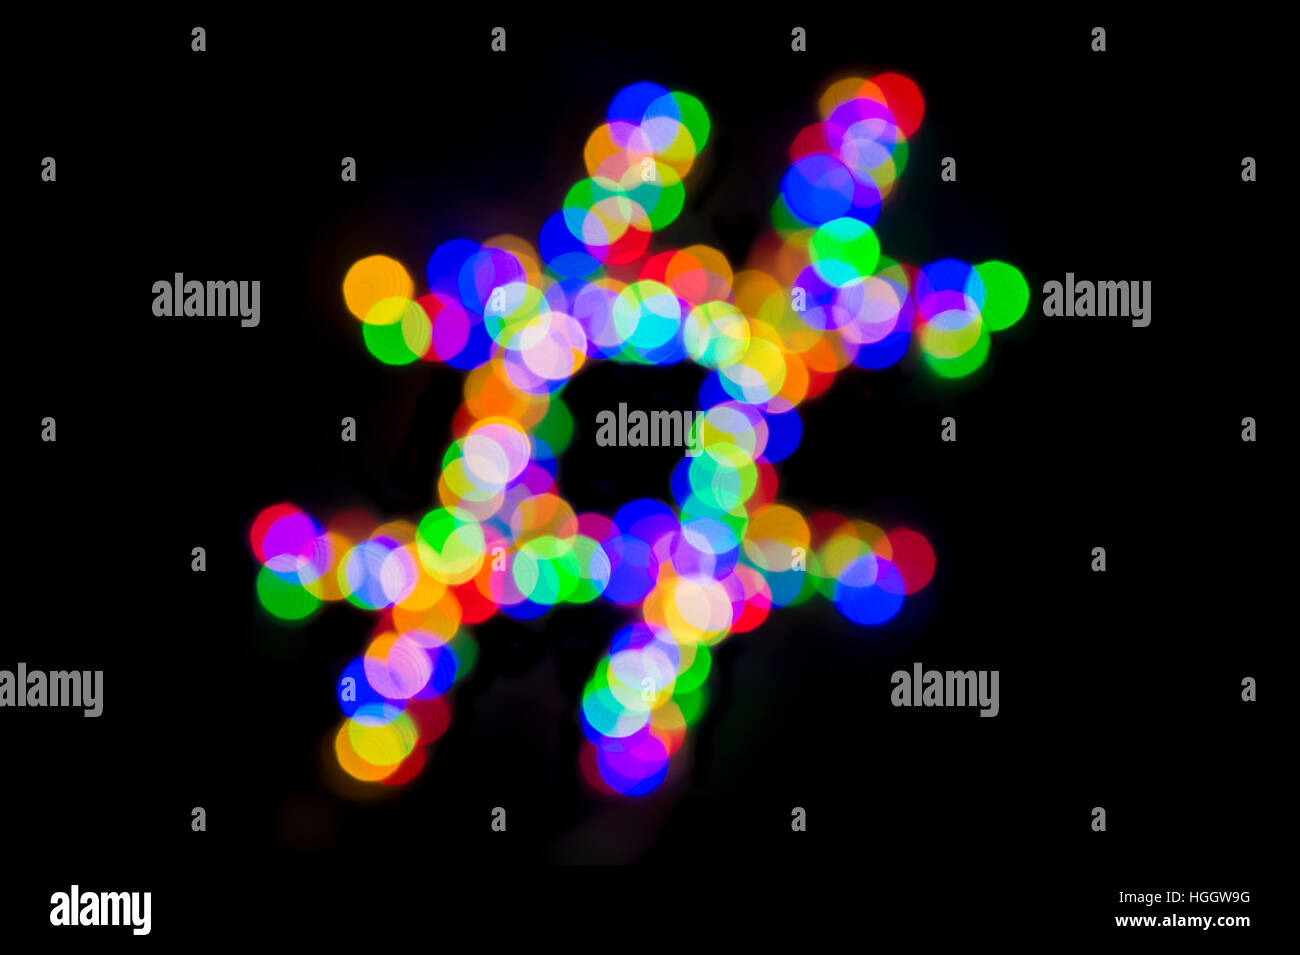 Hashtag made from bright colorful bokeh light bubbles as a symbol of mindfulness from technology glowing against a dark background Stock Photo